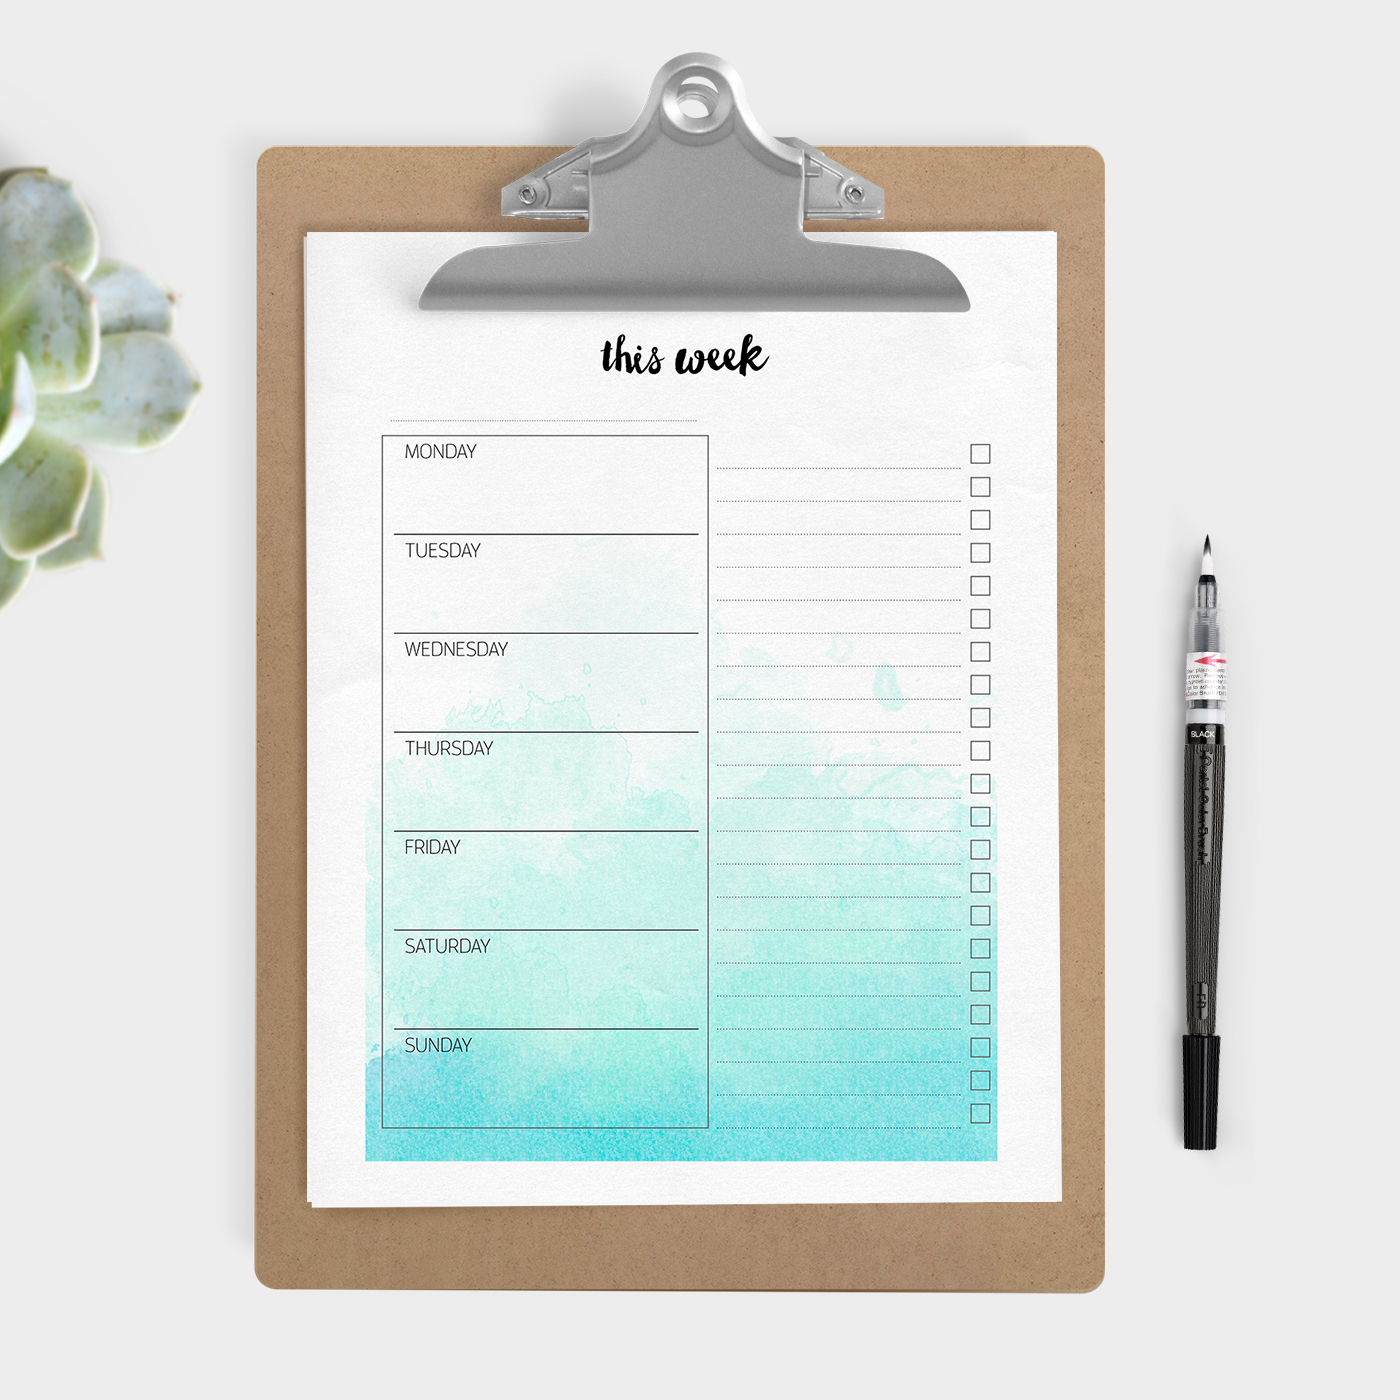 Free printable weekly planner A4 or Letter size sheet